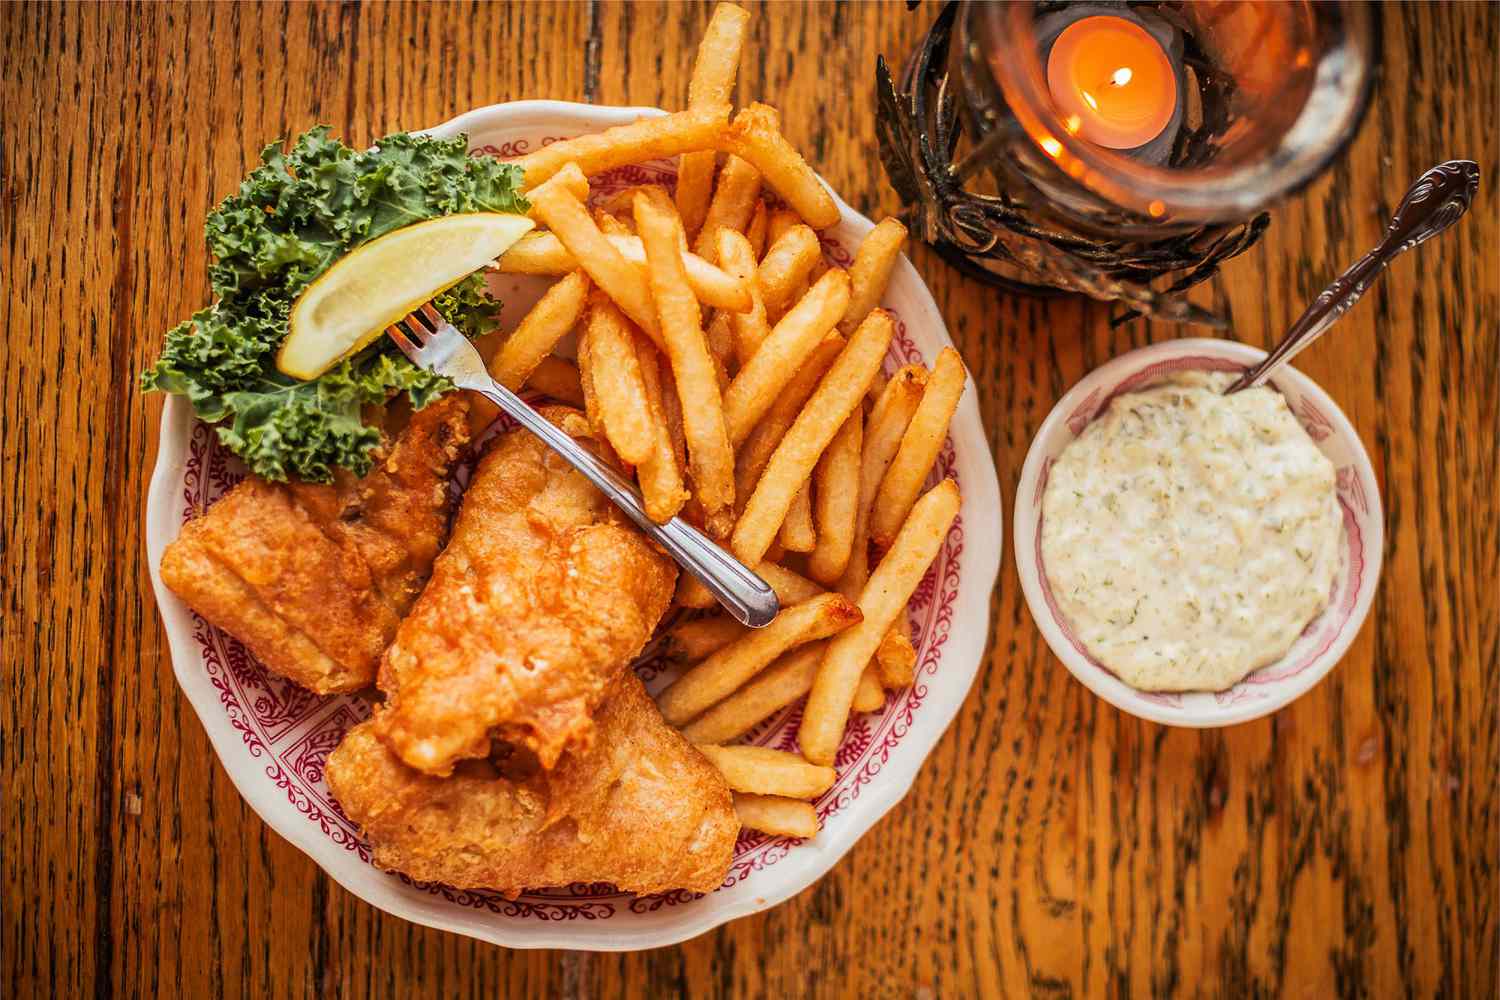 plate with lemon wedge, fork, fried battered fish, and fries next to bowl with tartar sauce and candle, all on wooden table